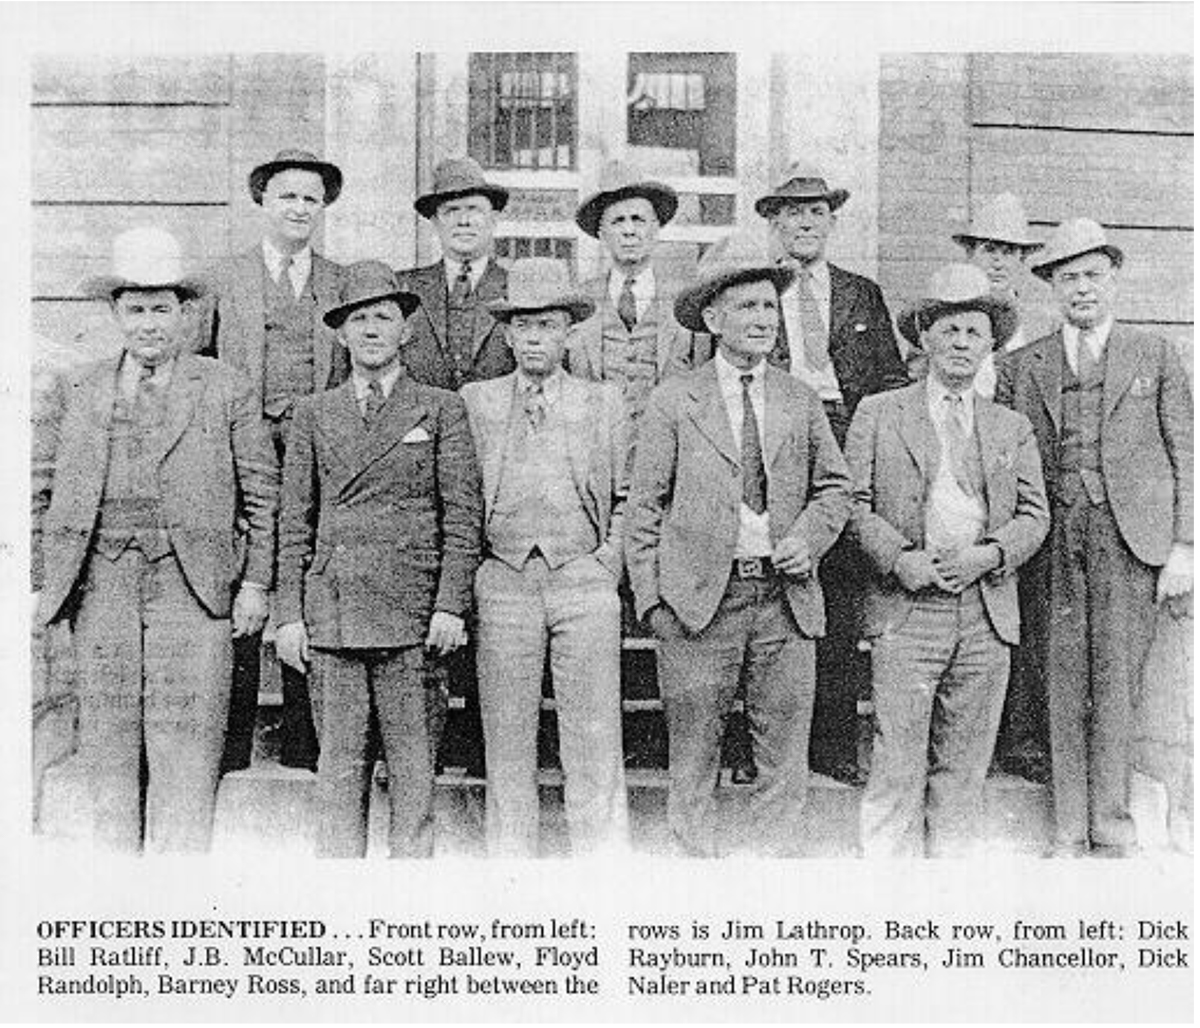 Carter County Sheriff's Office 1935 - Group Photo